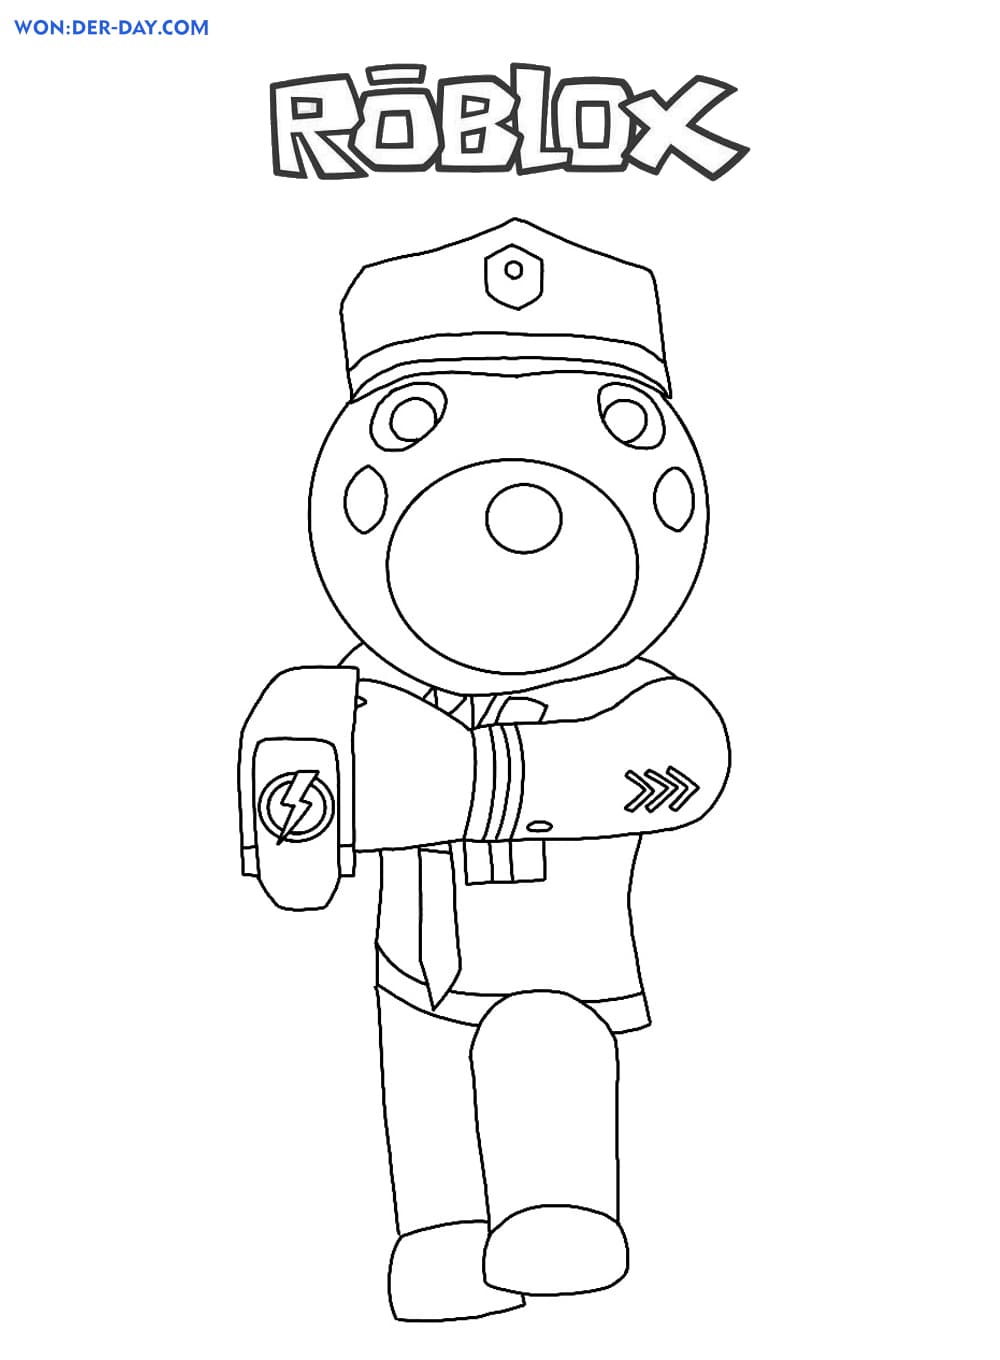 Piggy Roblox Coloring Pages Wonder Day Coloring Pages For Children And Adults - police officer piggy roblox